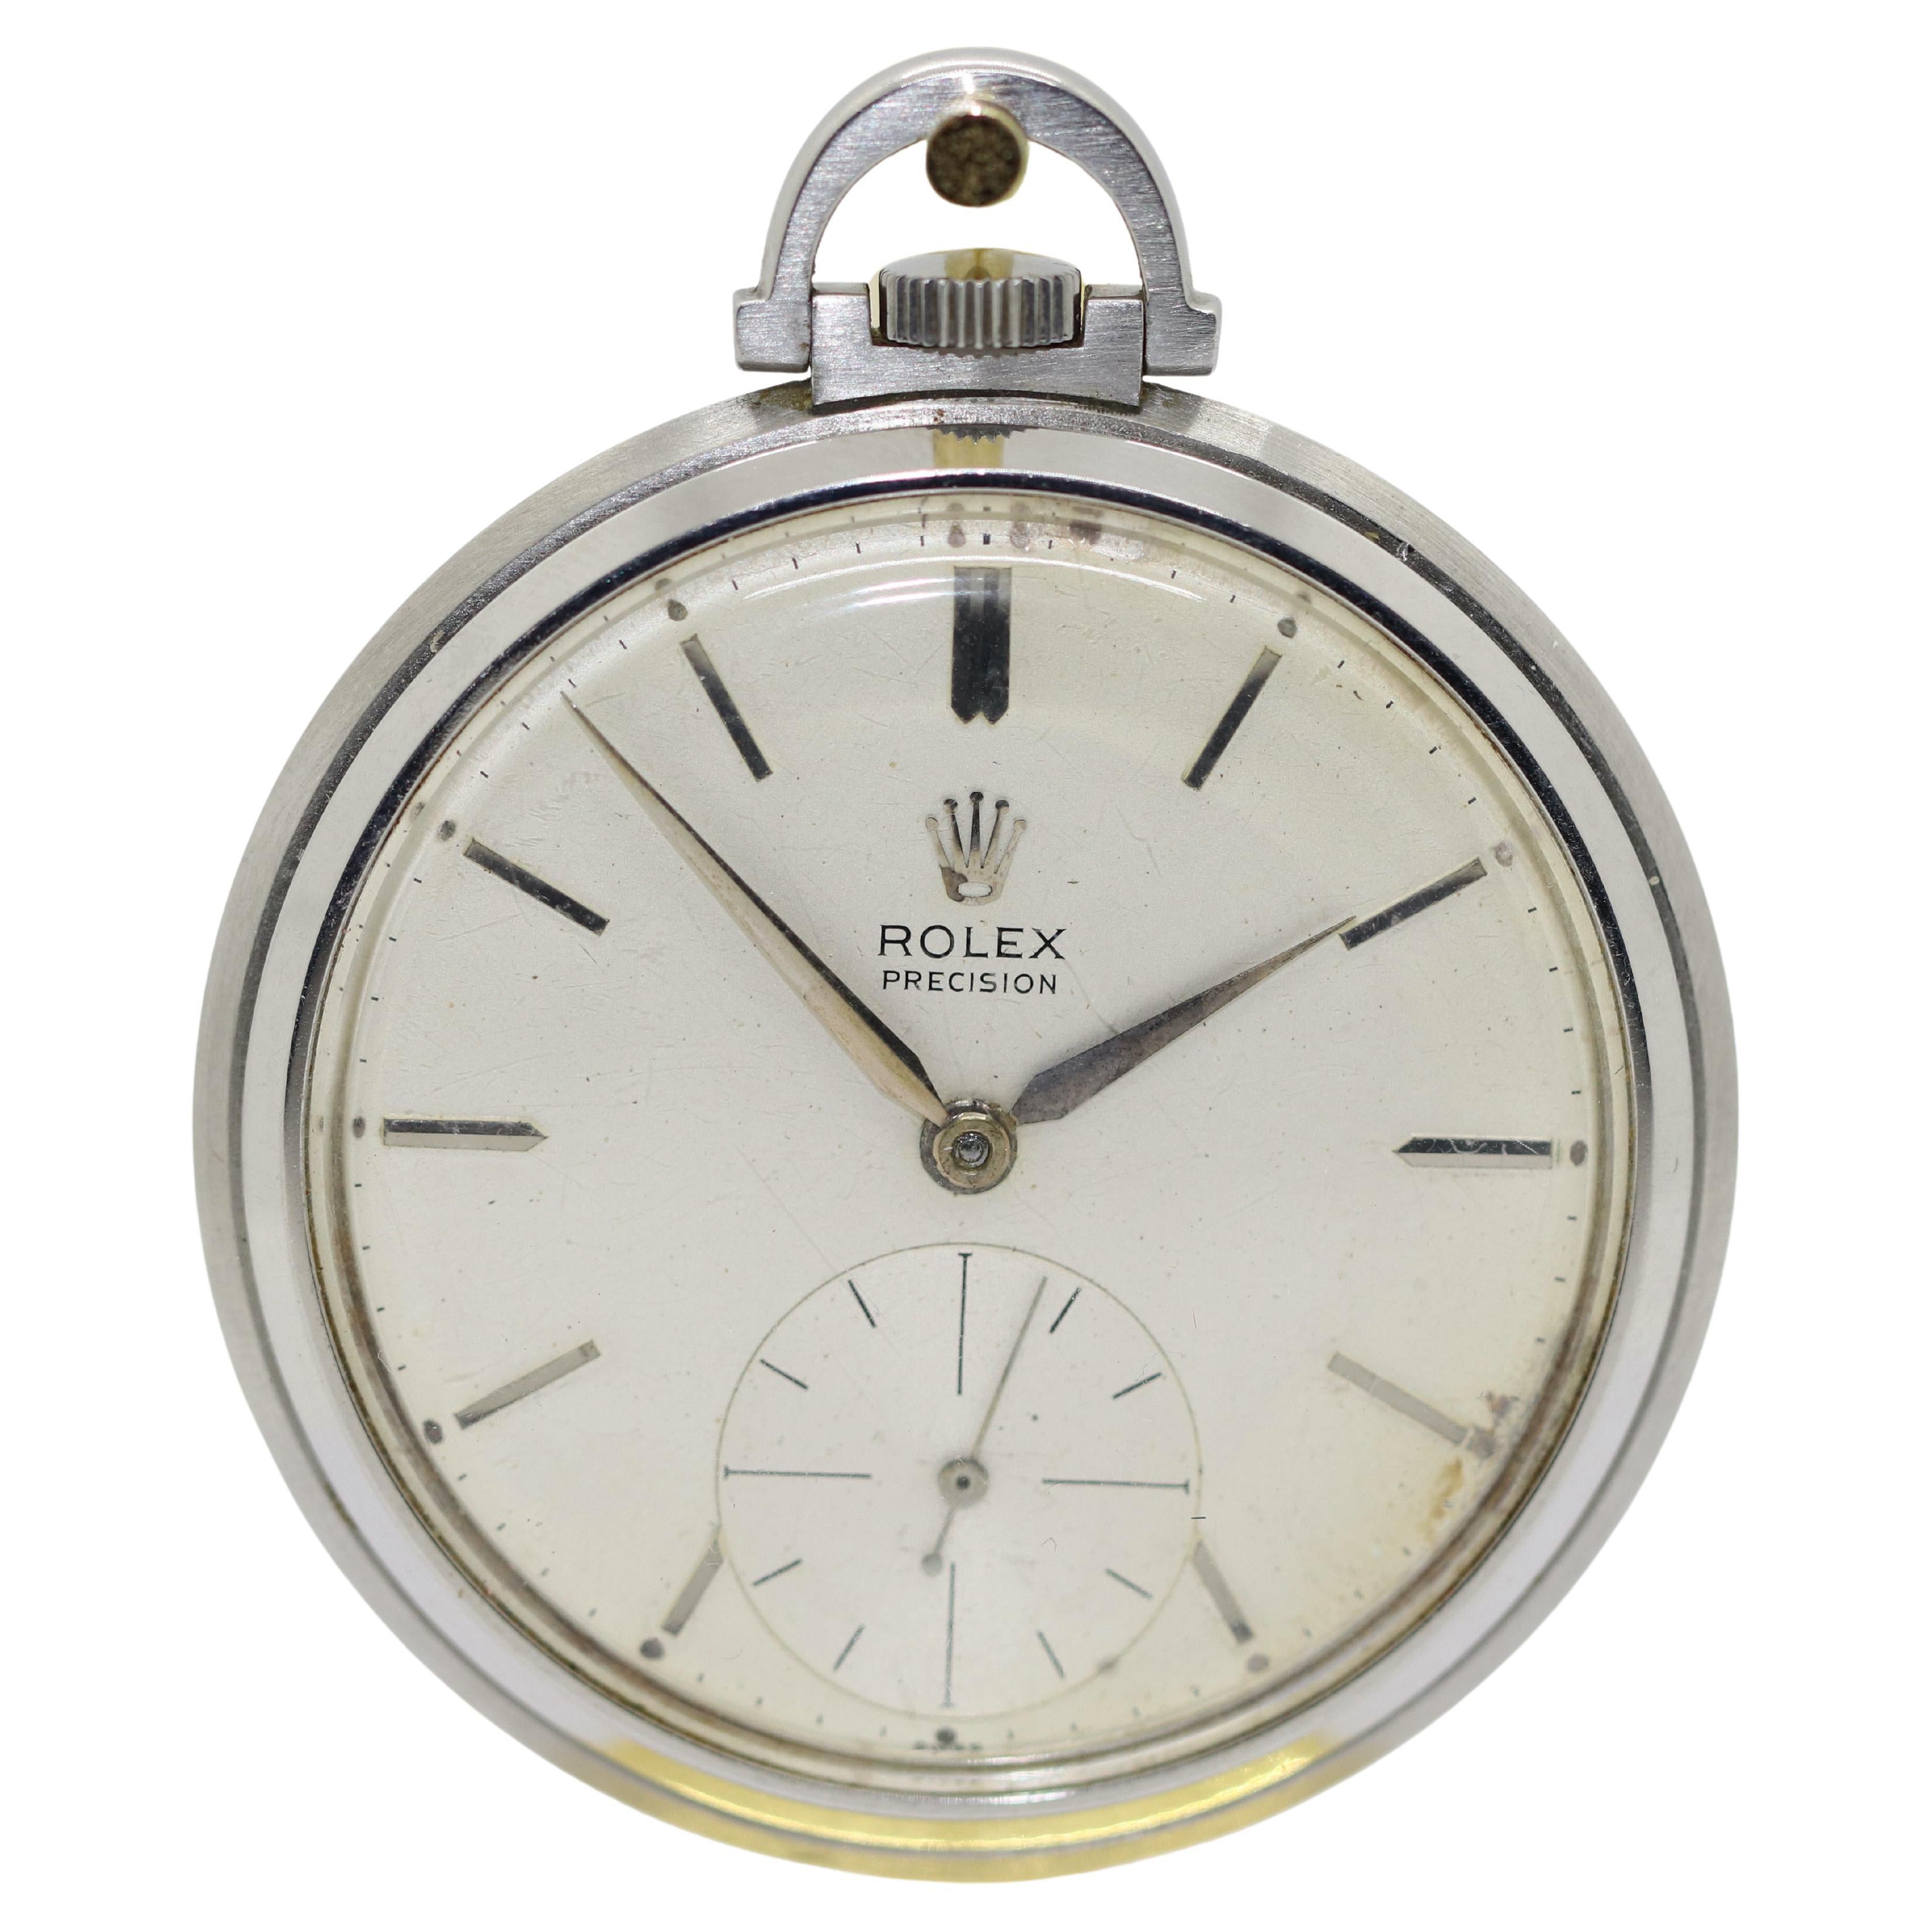 Rolex Precision Ref. 3400 Openface, Keyless Lever Pocket Watch, Stainless Steel For Sale